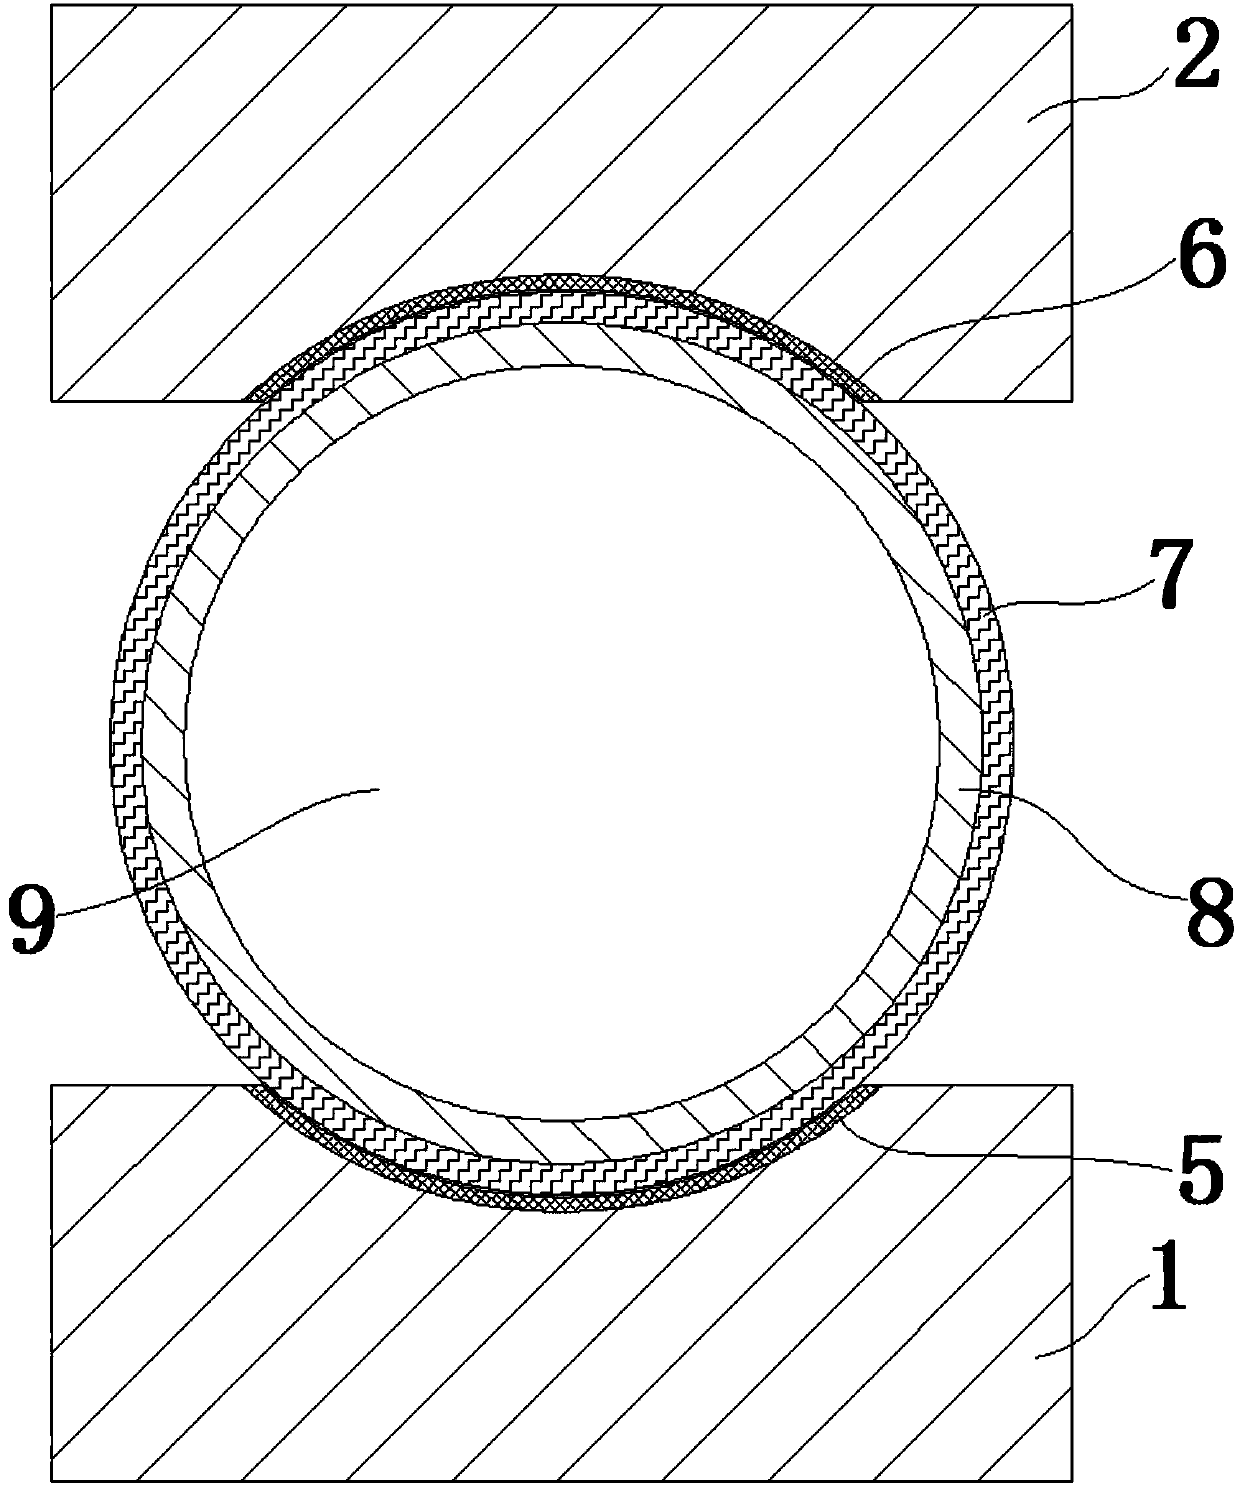 Coordination structure device of high-revolving-speed bearing and balls of high-revolving-speed bearing